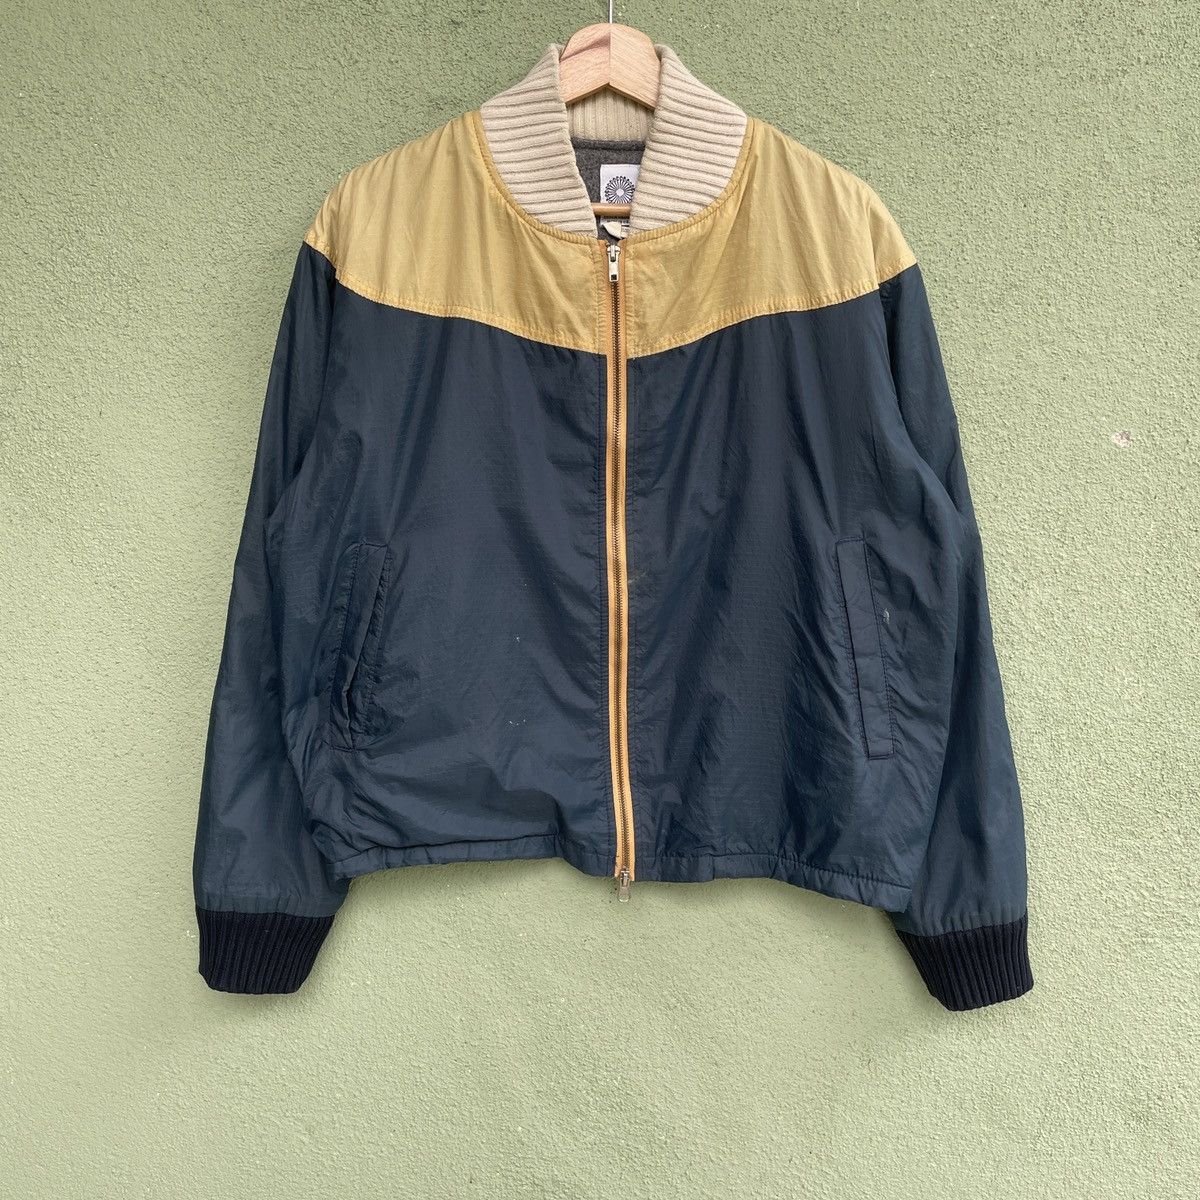 Bomber Jacket THE BOULDER MOUNTAINEER Made in USA Zipper Jacket | Grailed